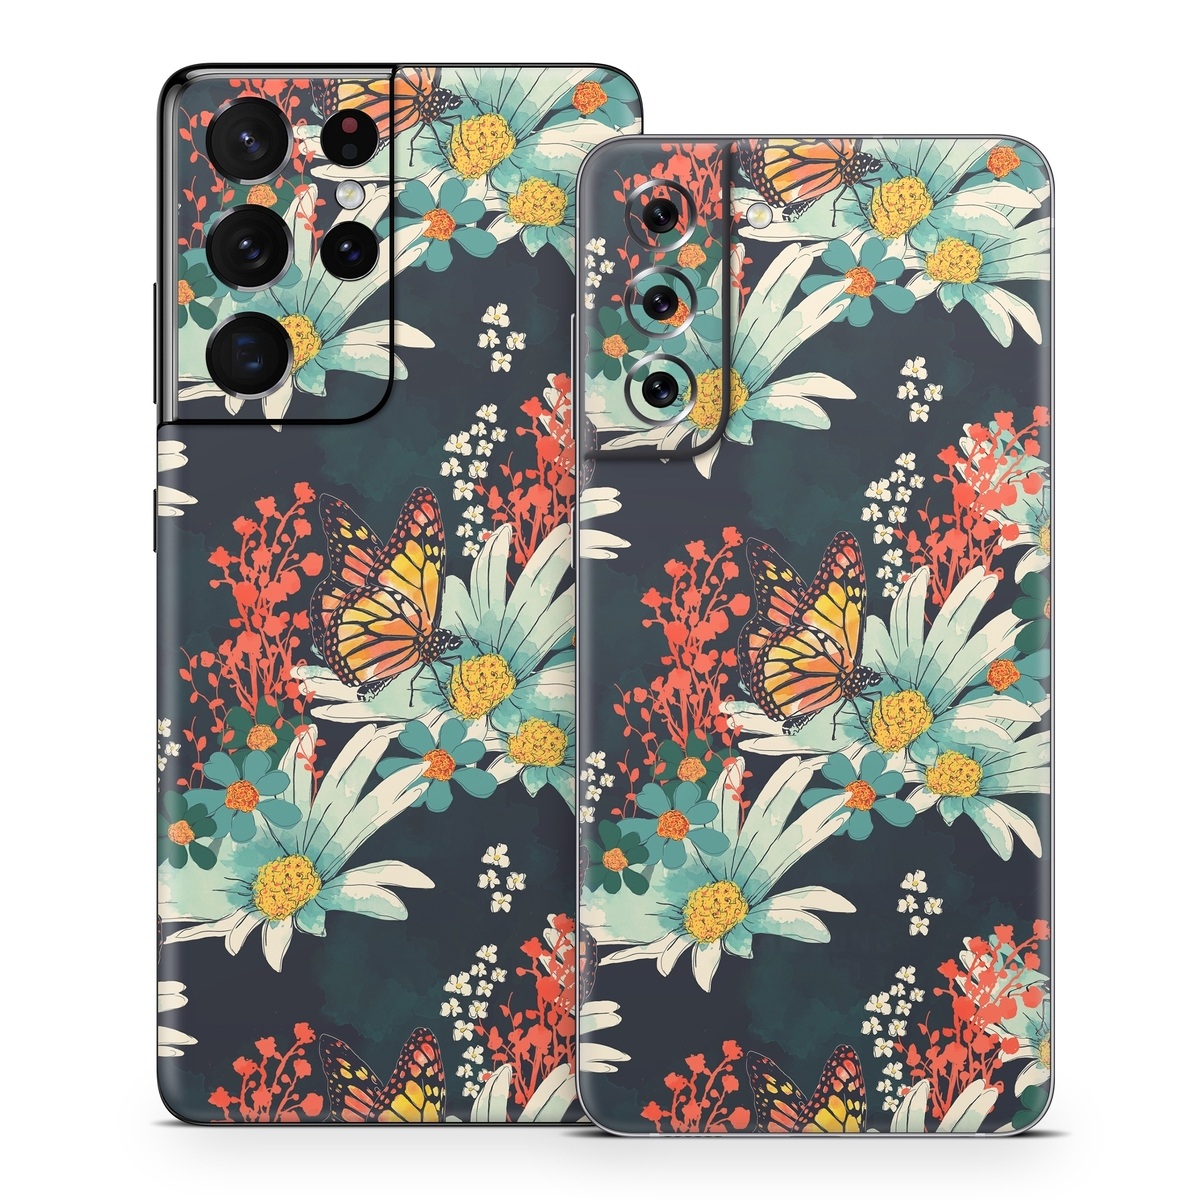 Samsung Galaxy S21 Series Skin design of Floral design, Pattern, Flower, Floristry, Textile, Botany, Plant, Visual arts, Design, Flower Arranging, with black, gray, green, red, blue, pink colors